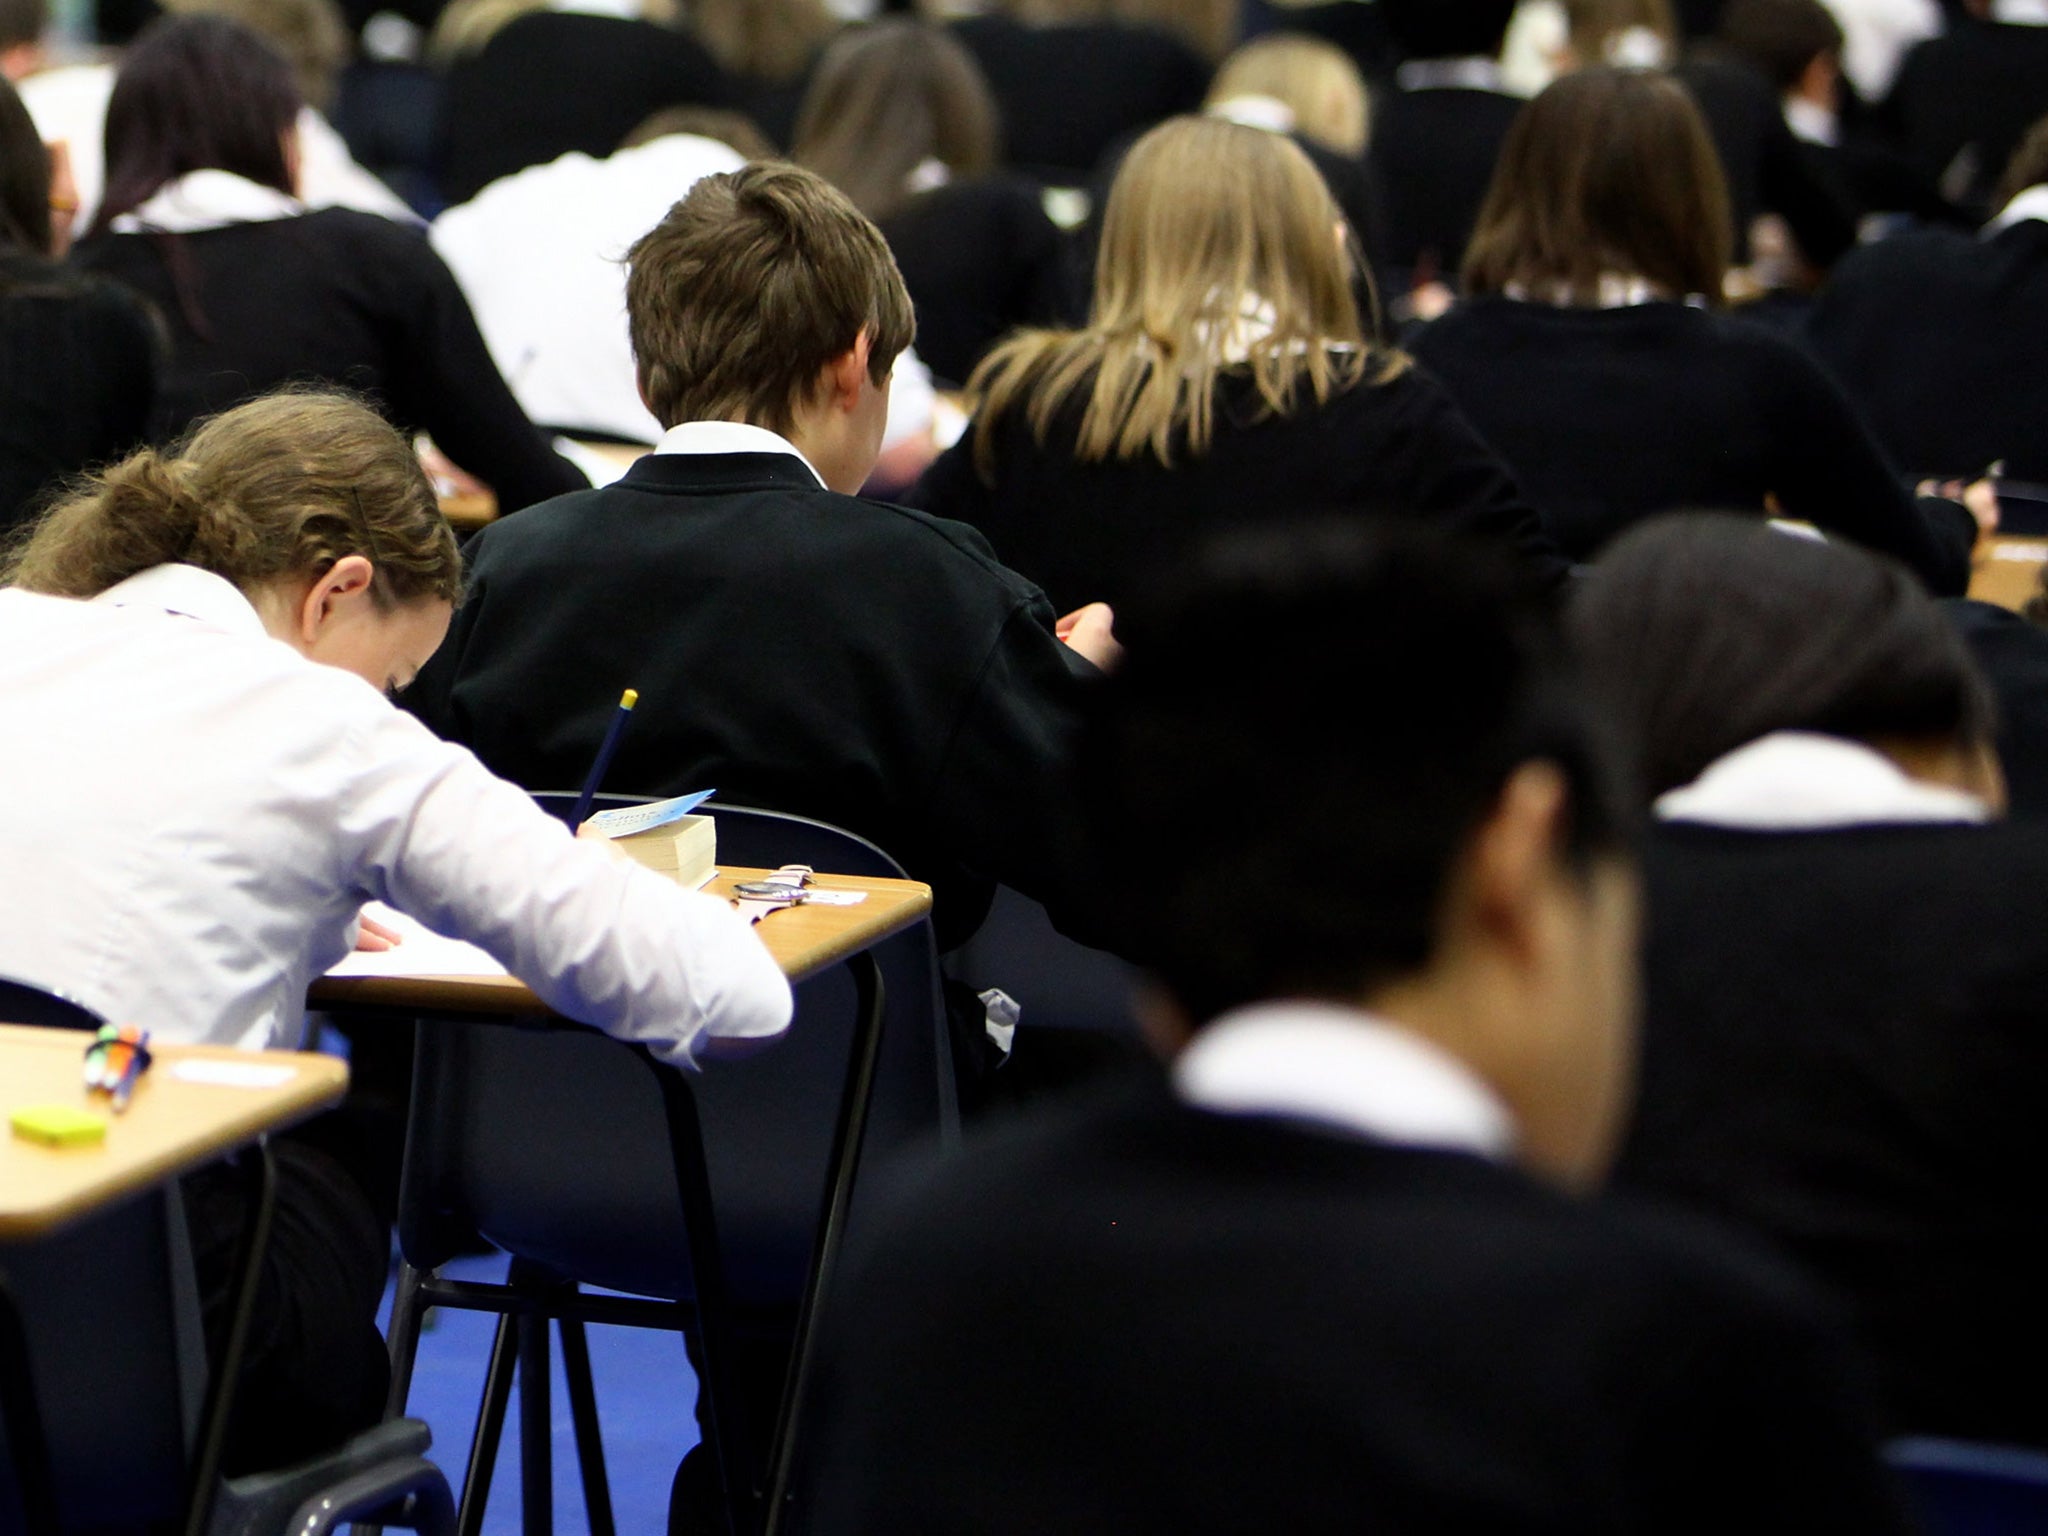 An Edexcel maths exam trended on Twitter after pupils said it was difficult